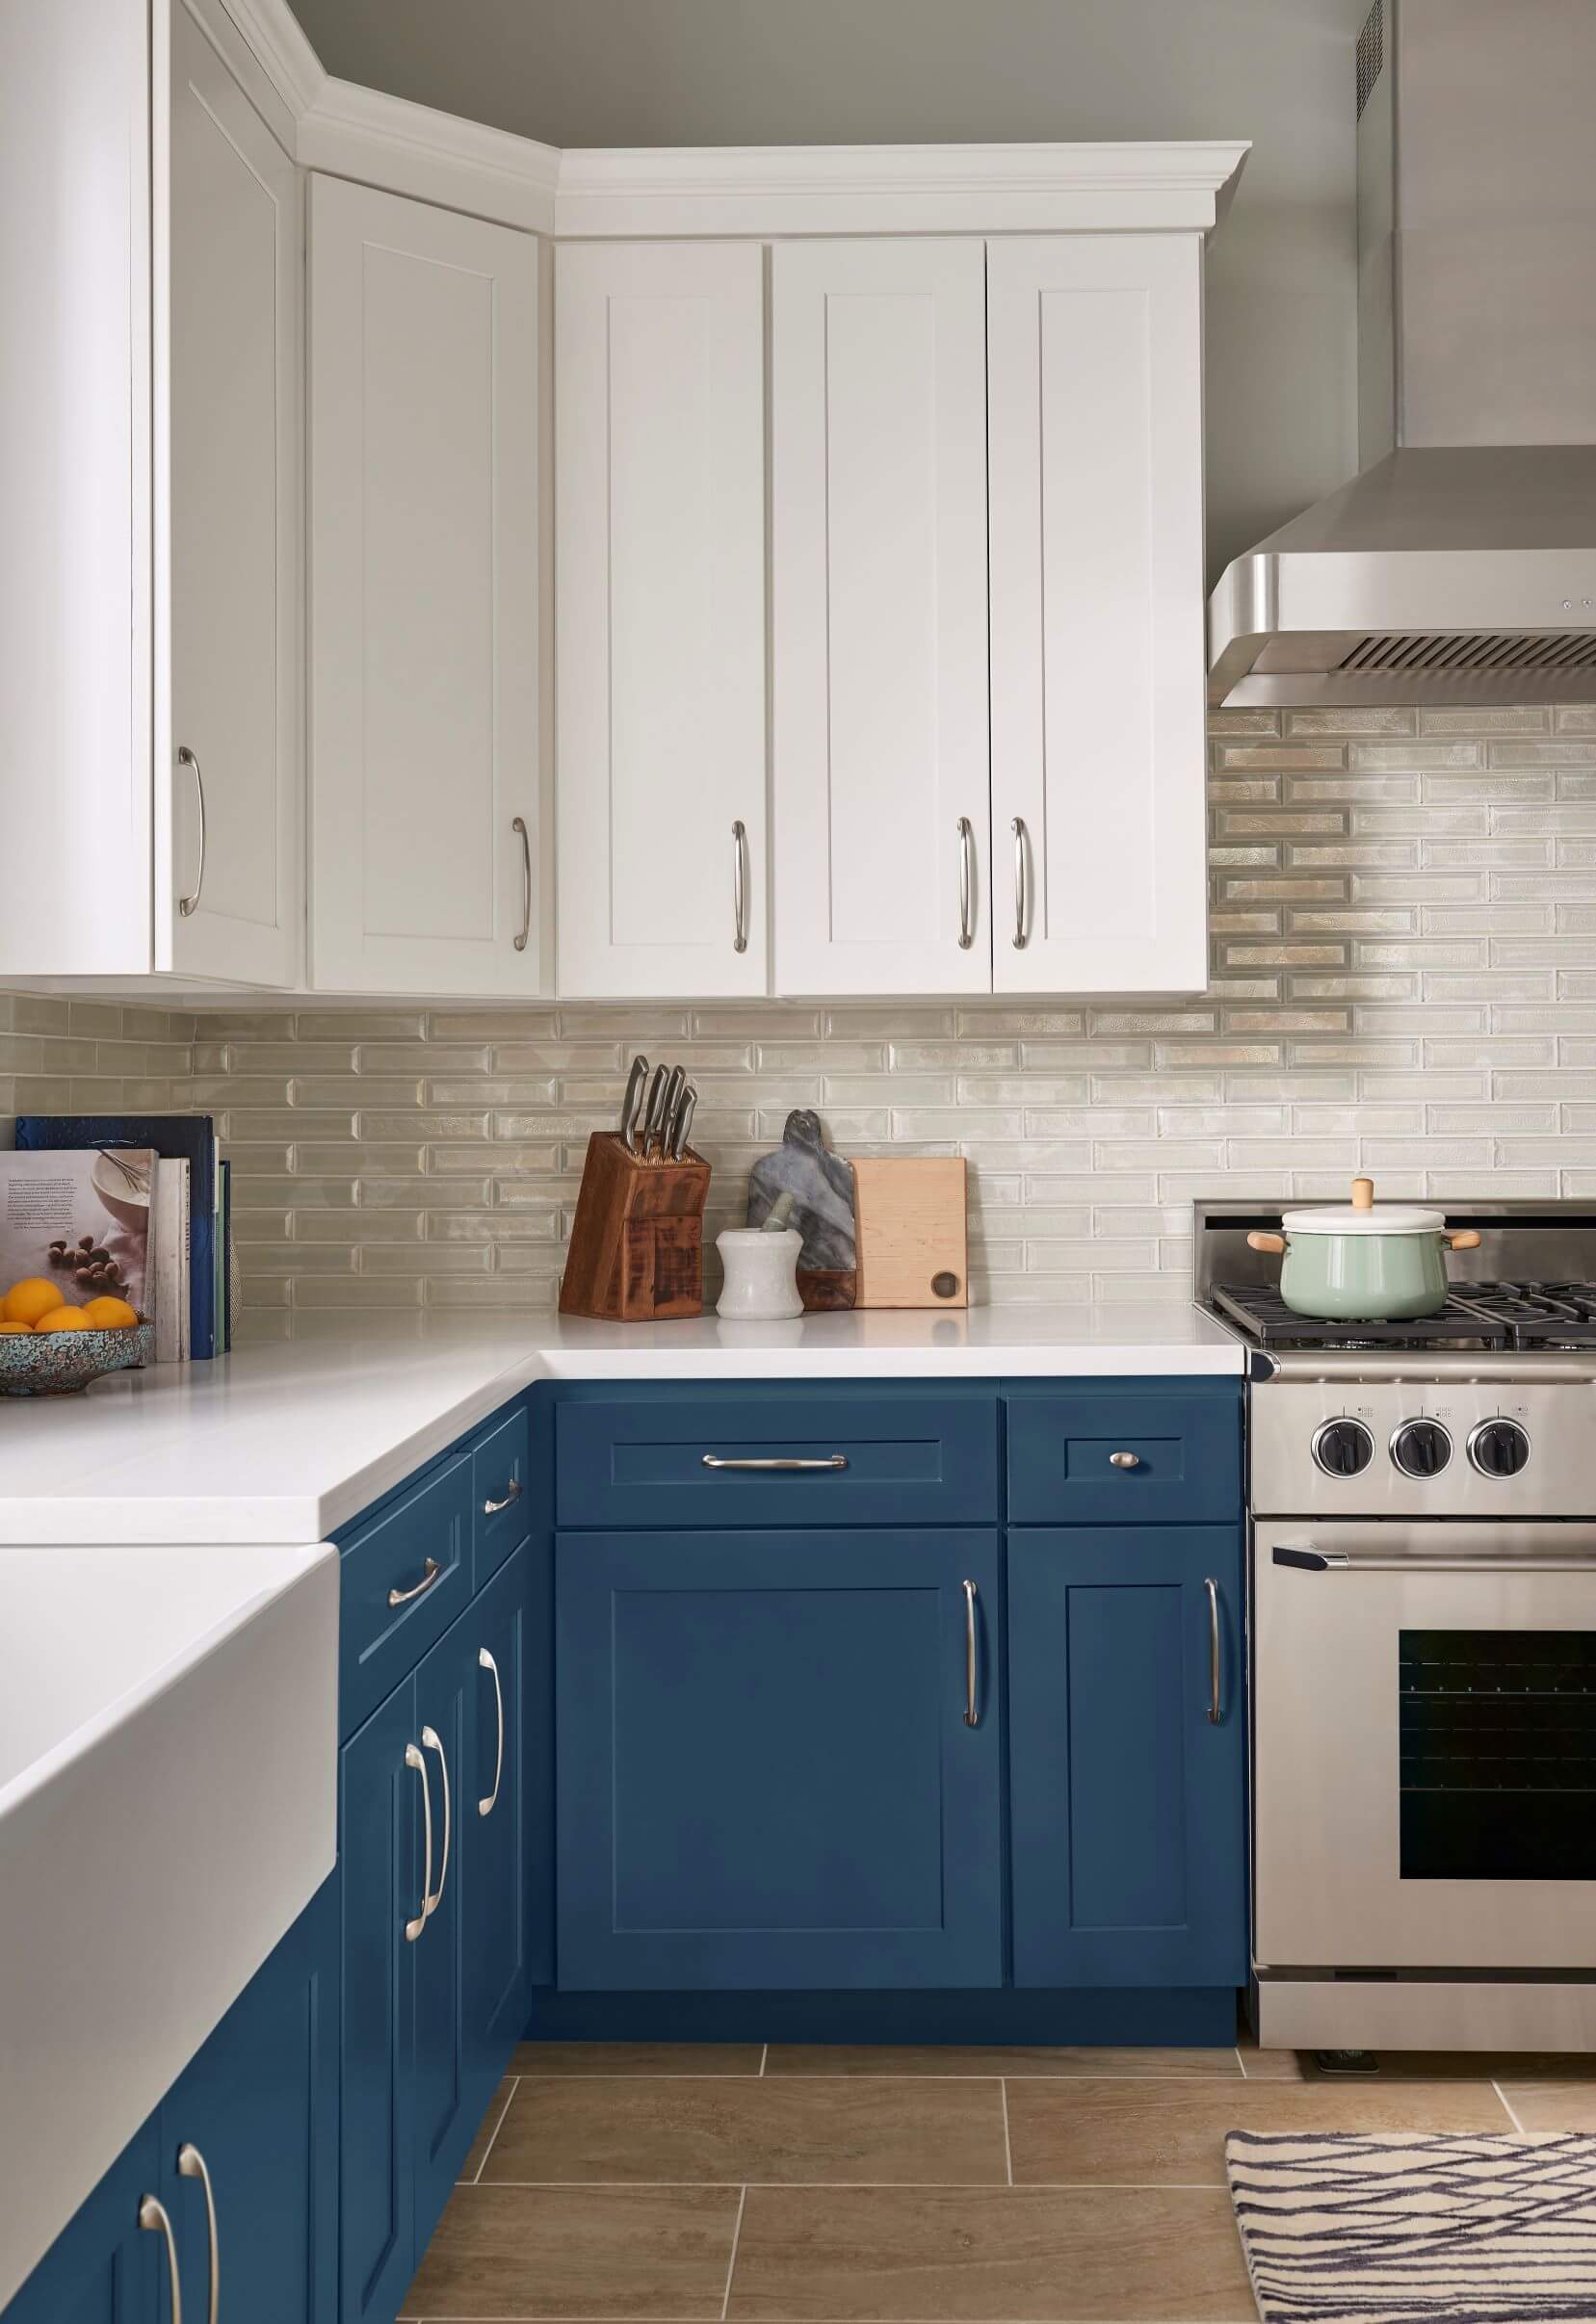 East Coast Prebuilt Kitchen Cabinets with blue lower cabinets and white wall cabinets